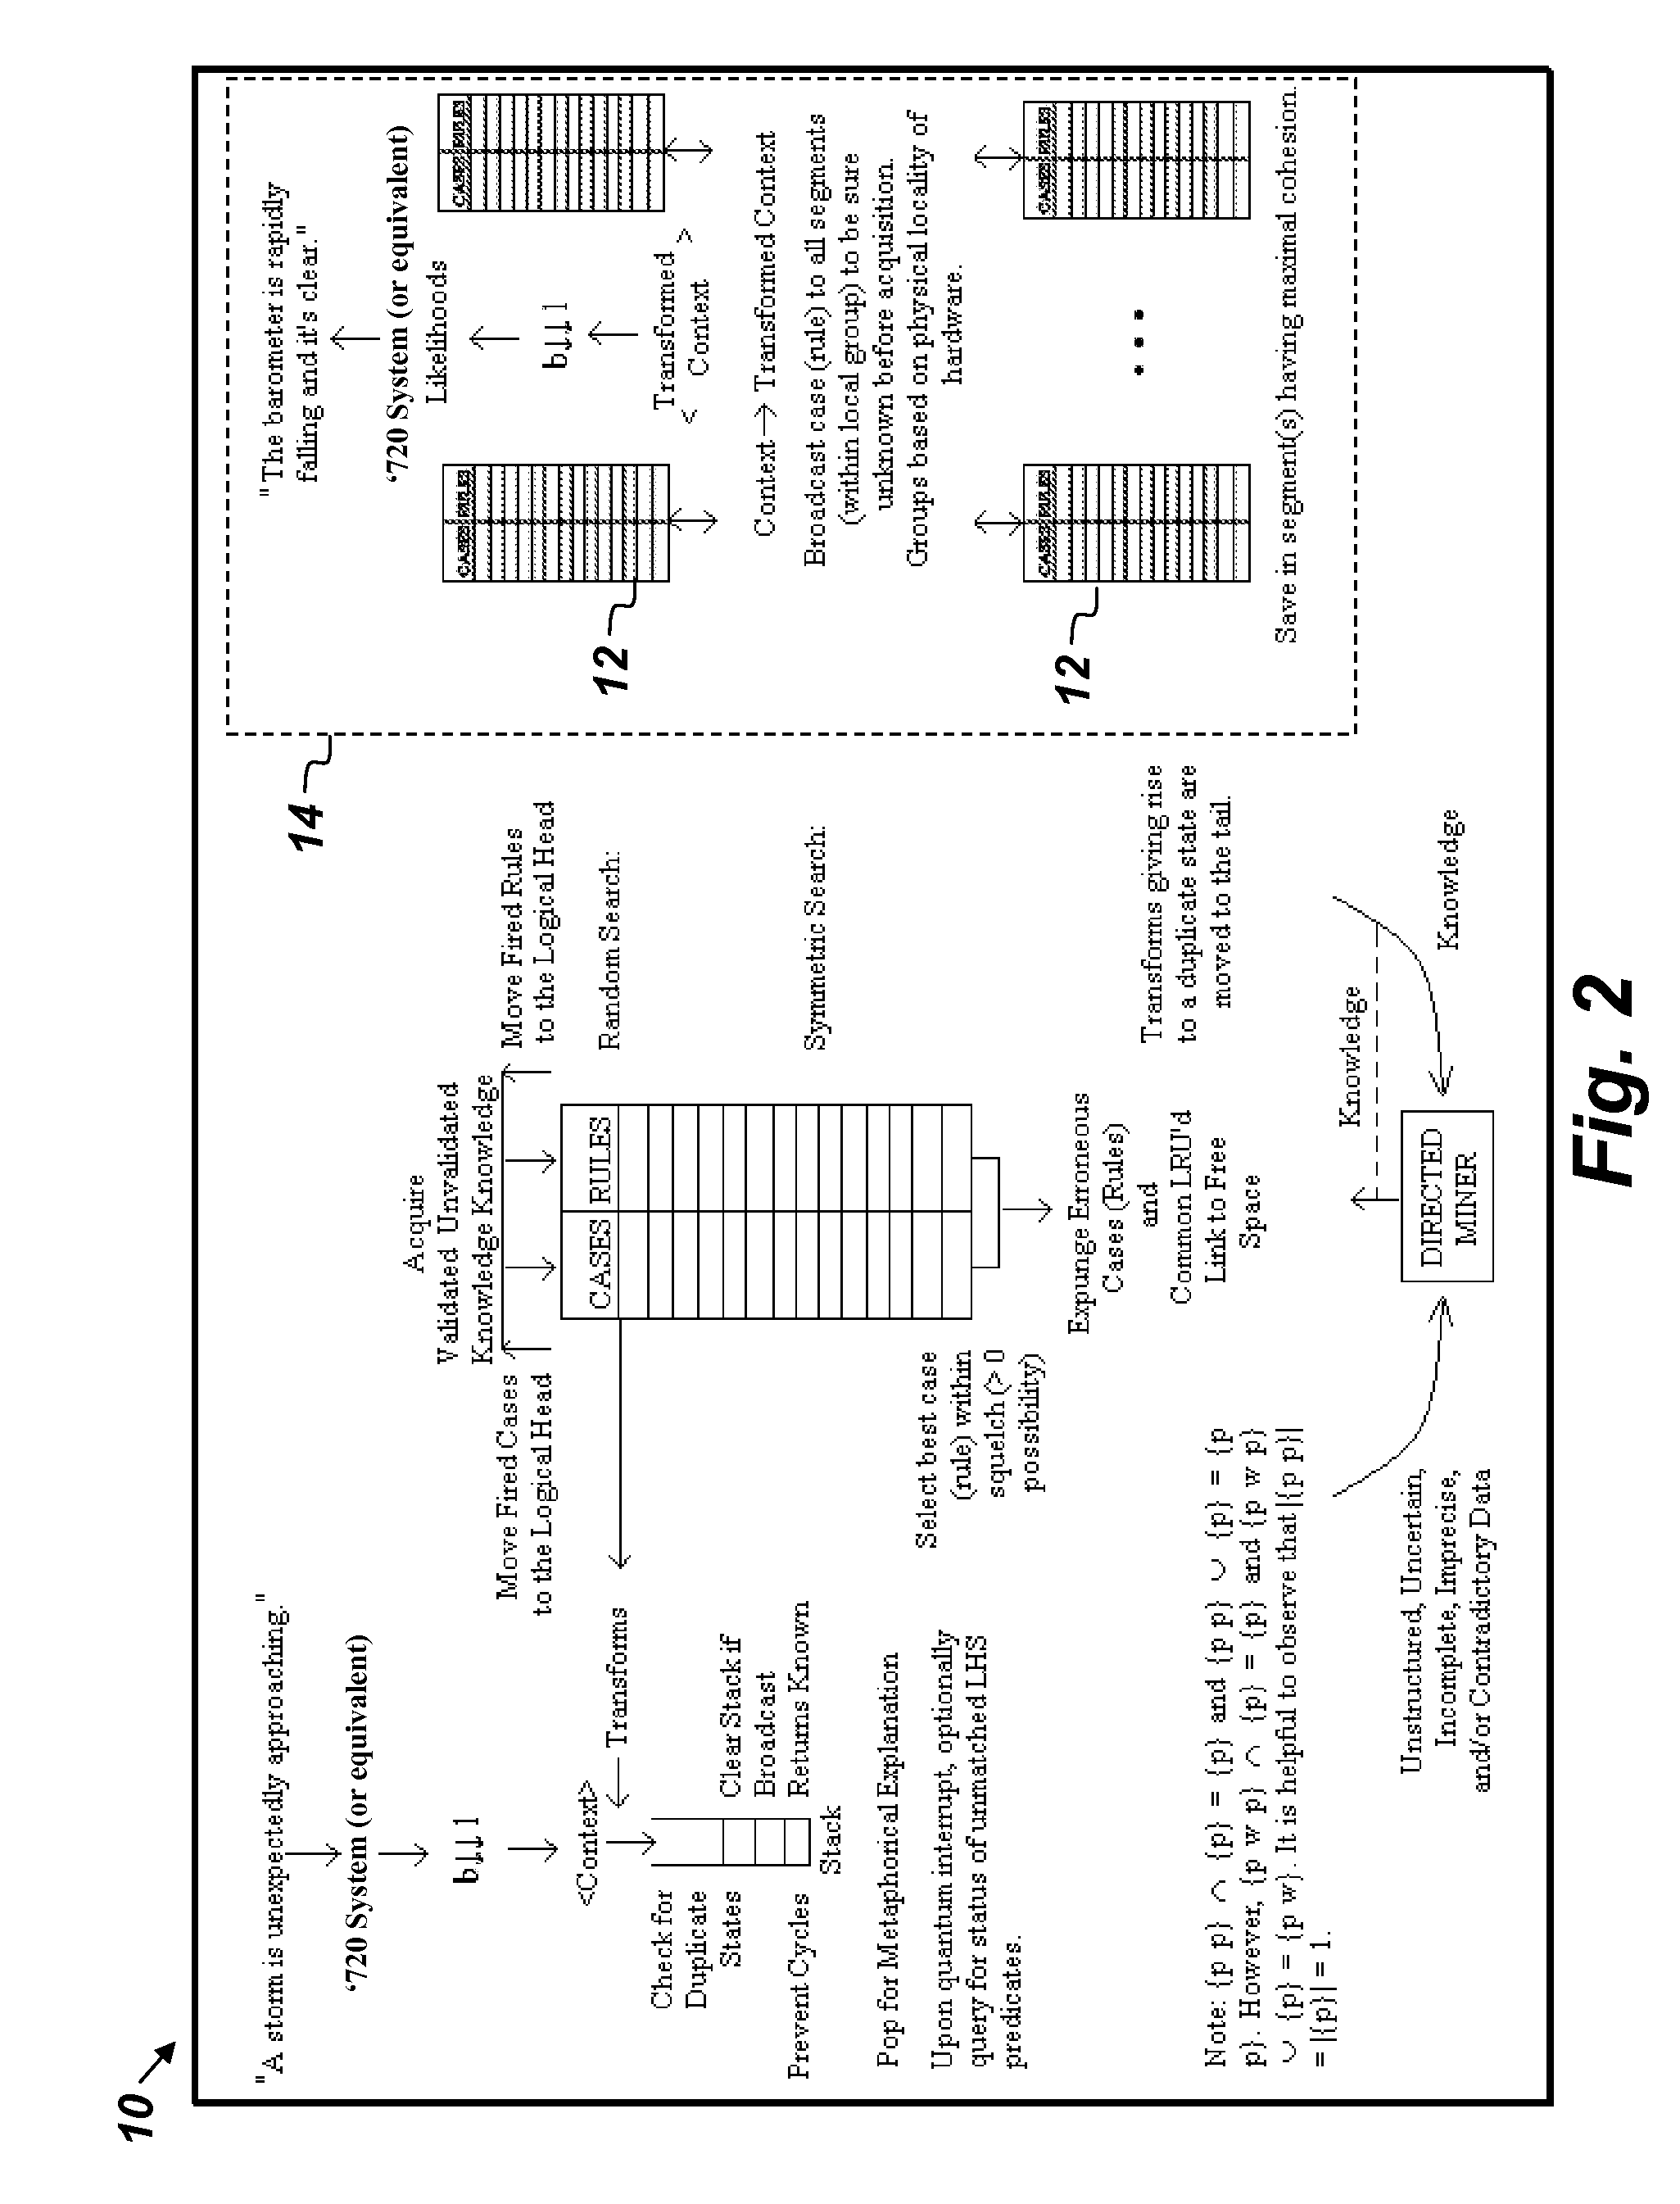 System and method for mining large, diverse, distributed, and heterogeneous datasets